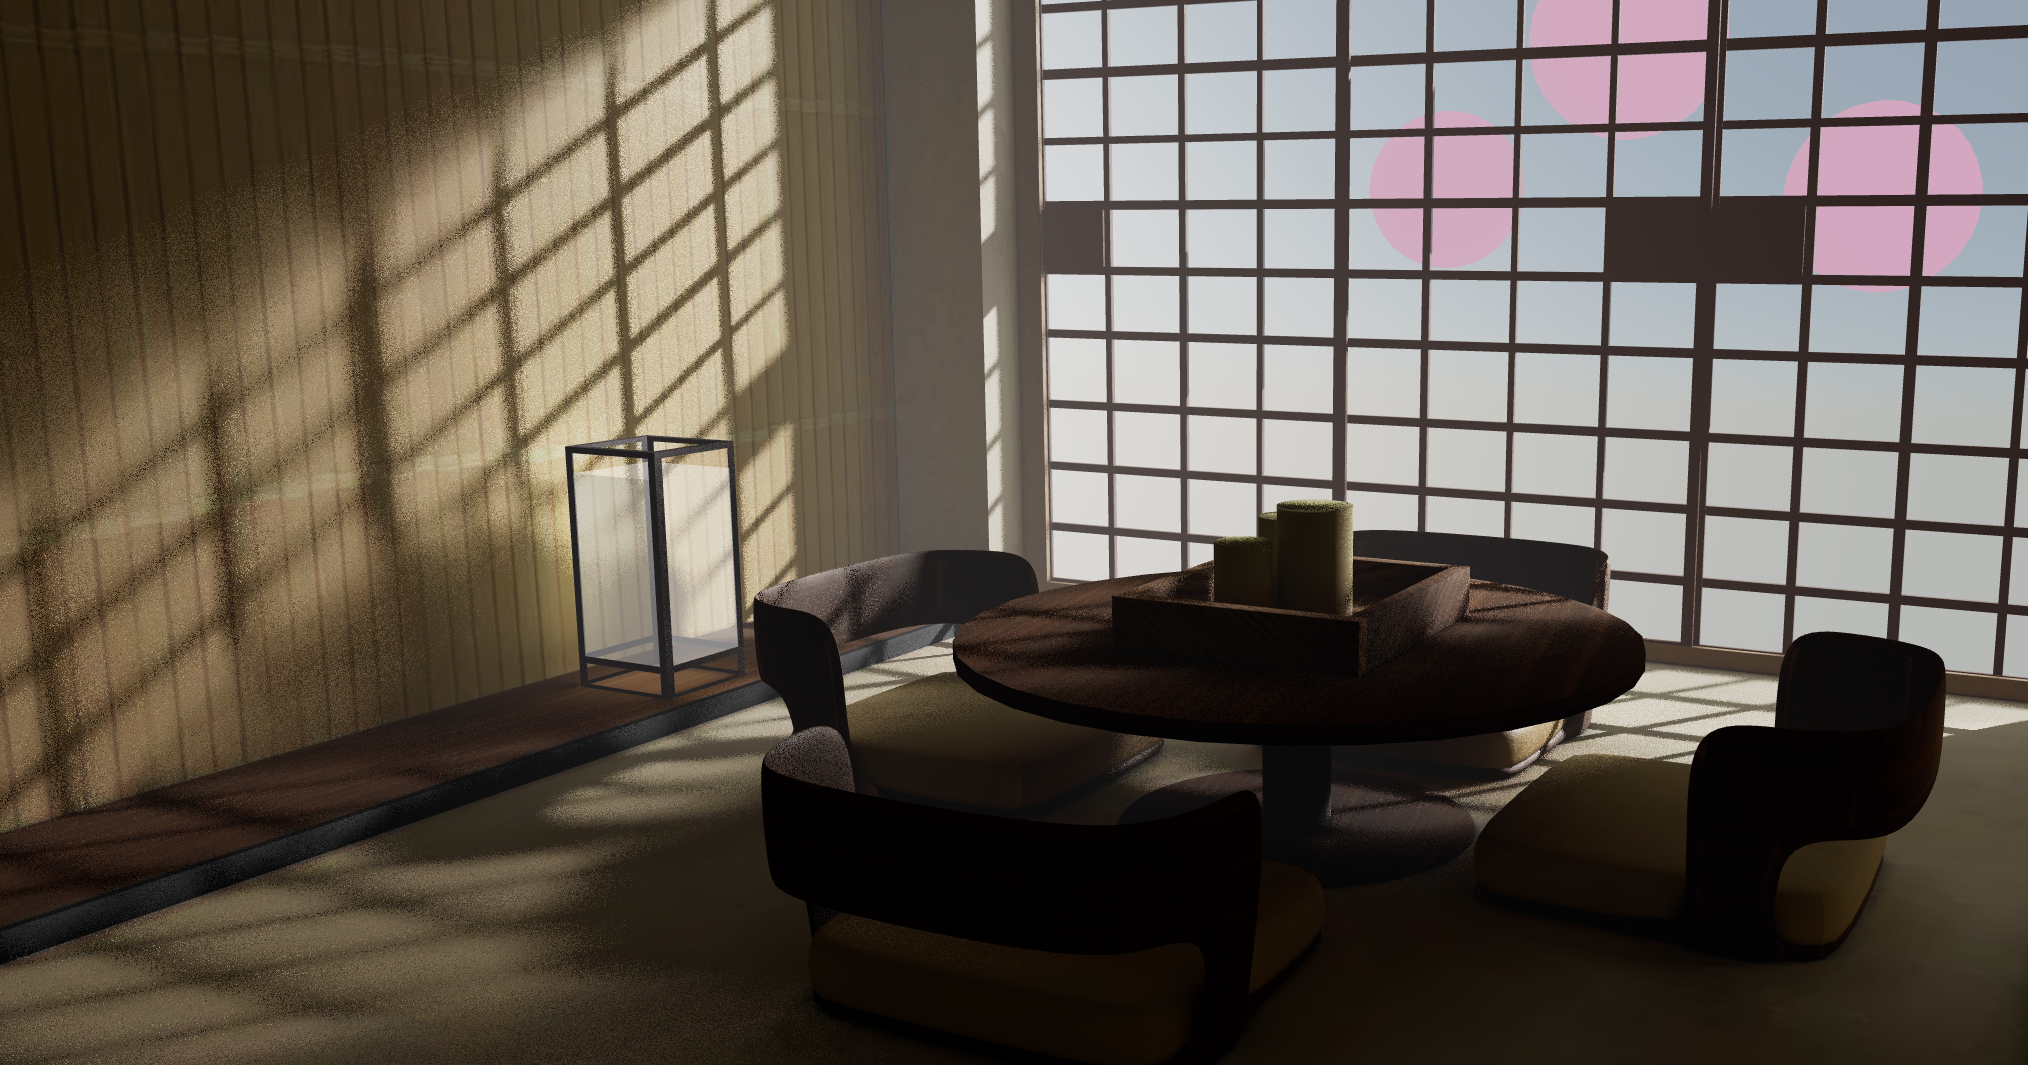 Room with soft shadows